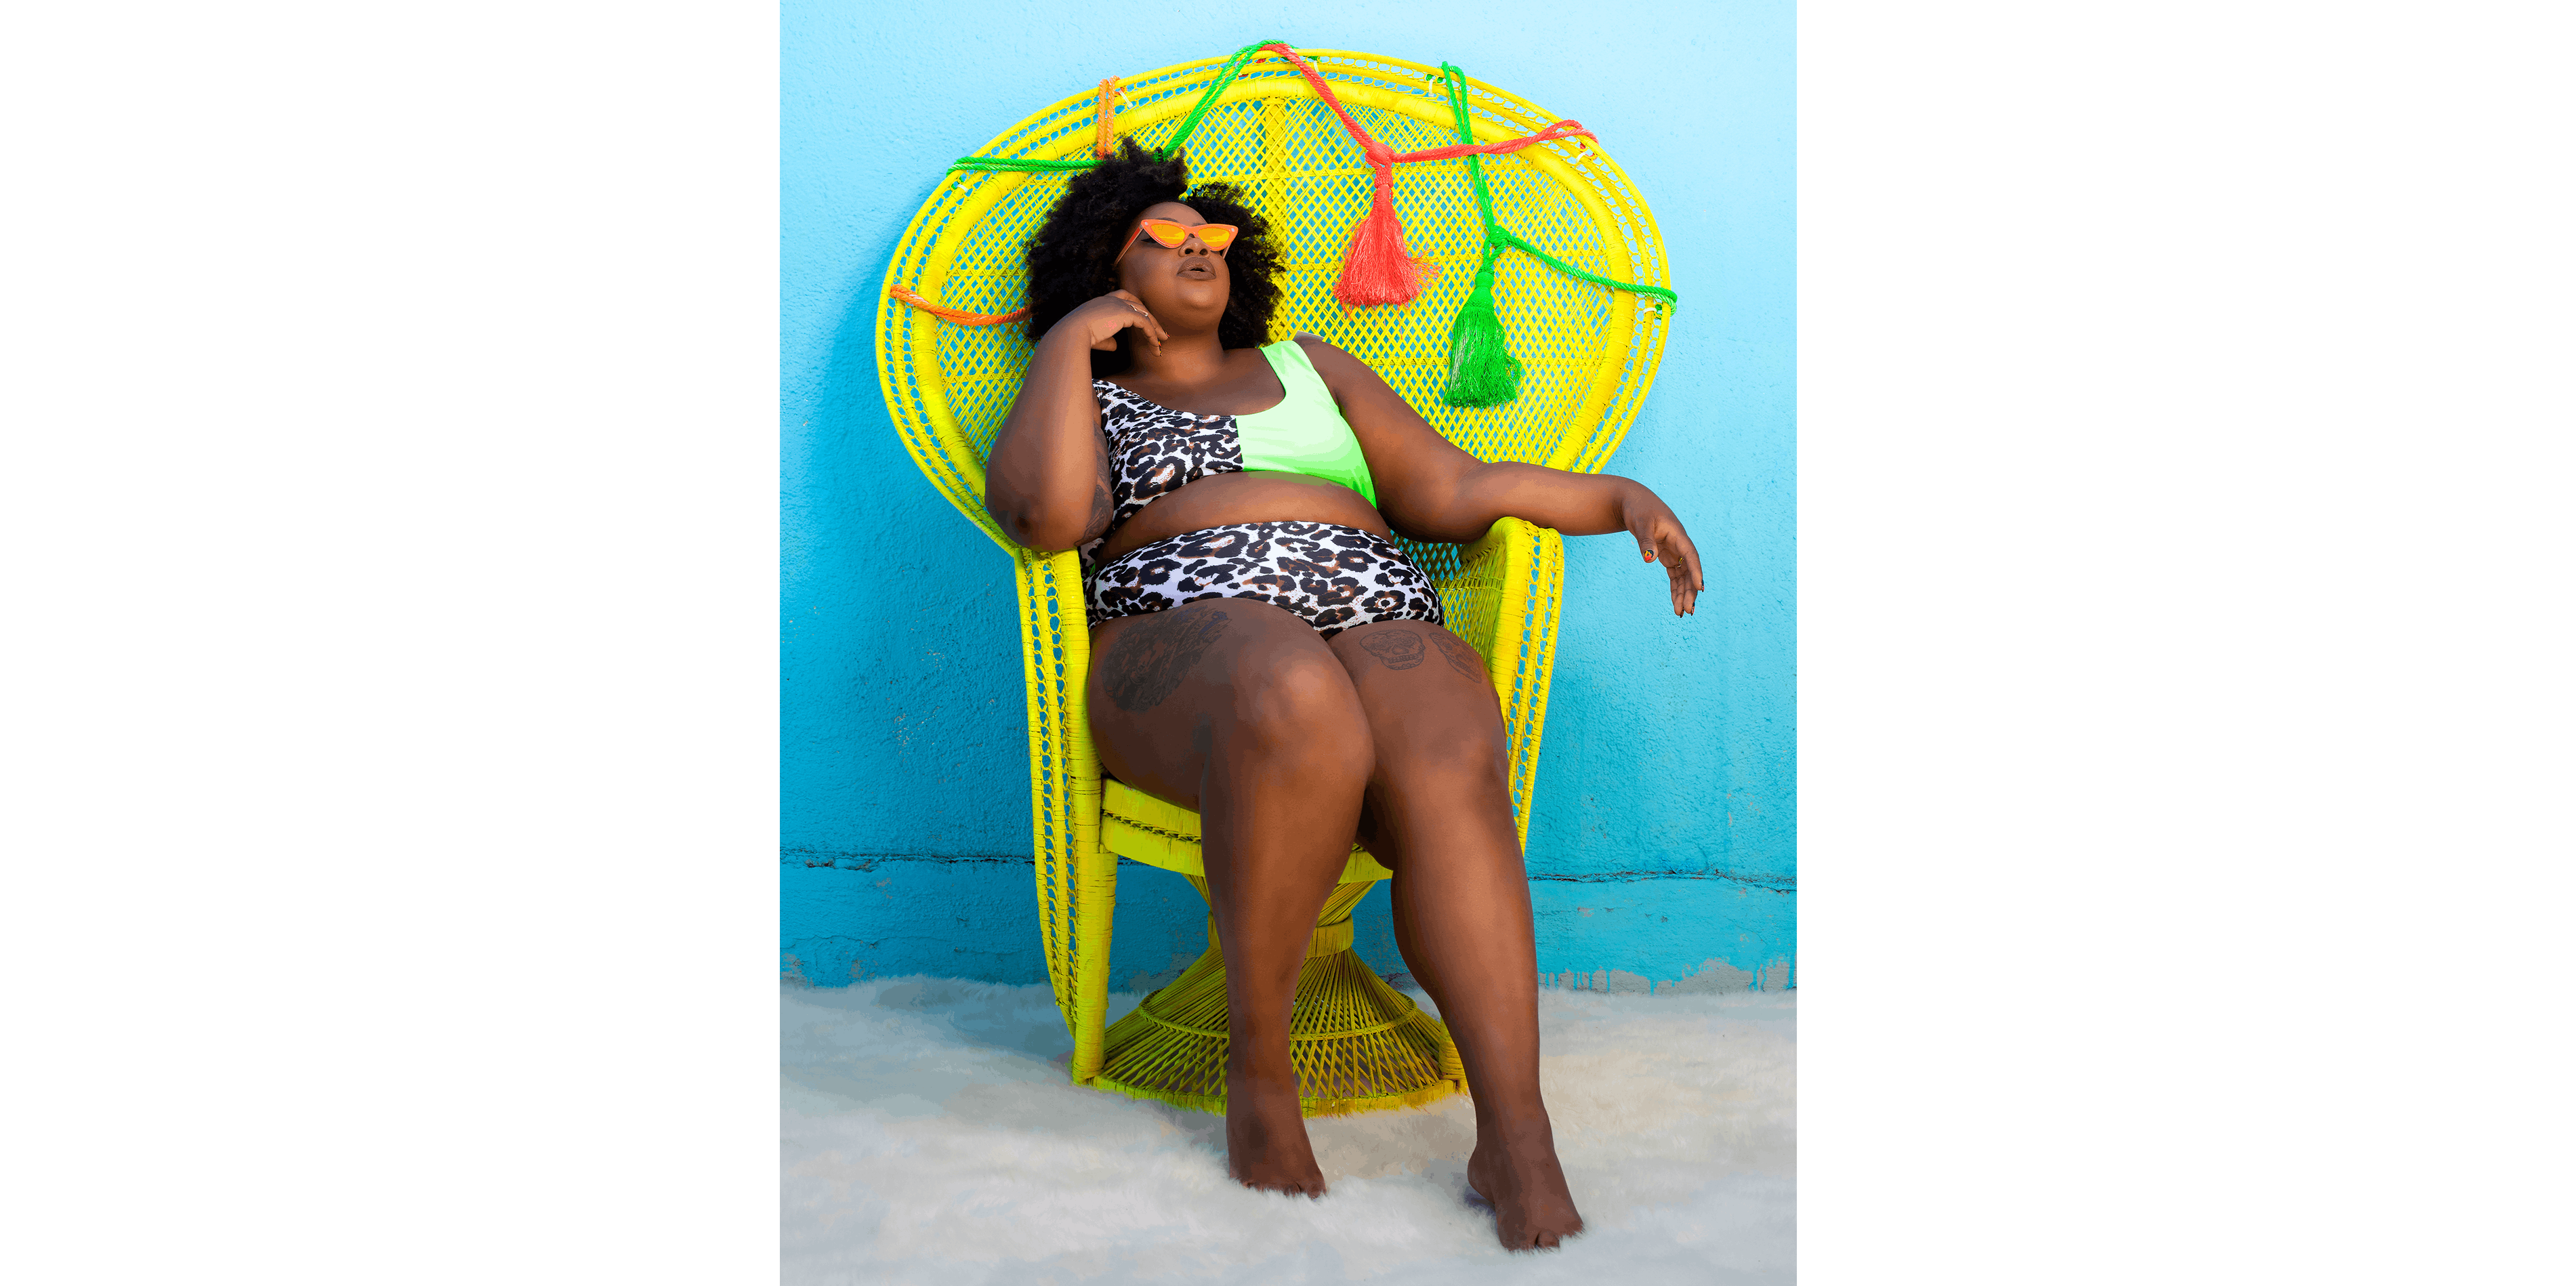 Nicole Byer basks in a bright yellow wicker chair in front of a sky blue wall, wearing a bikini with leopard print and sunglasses.